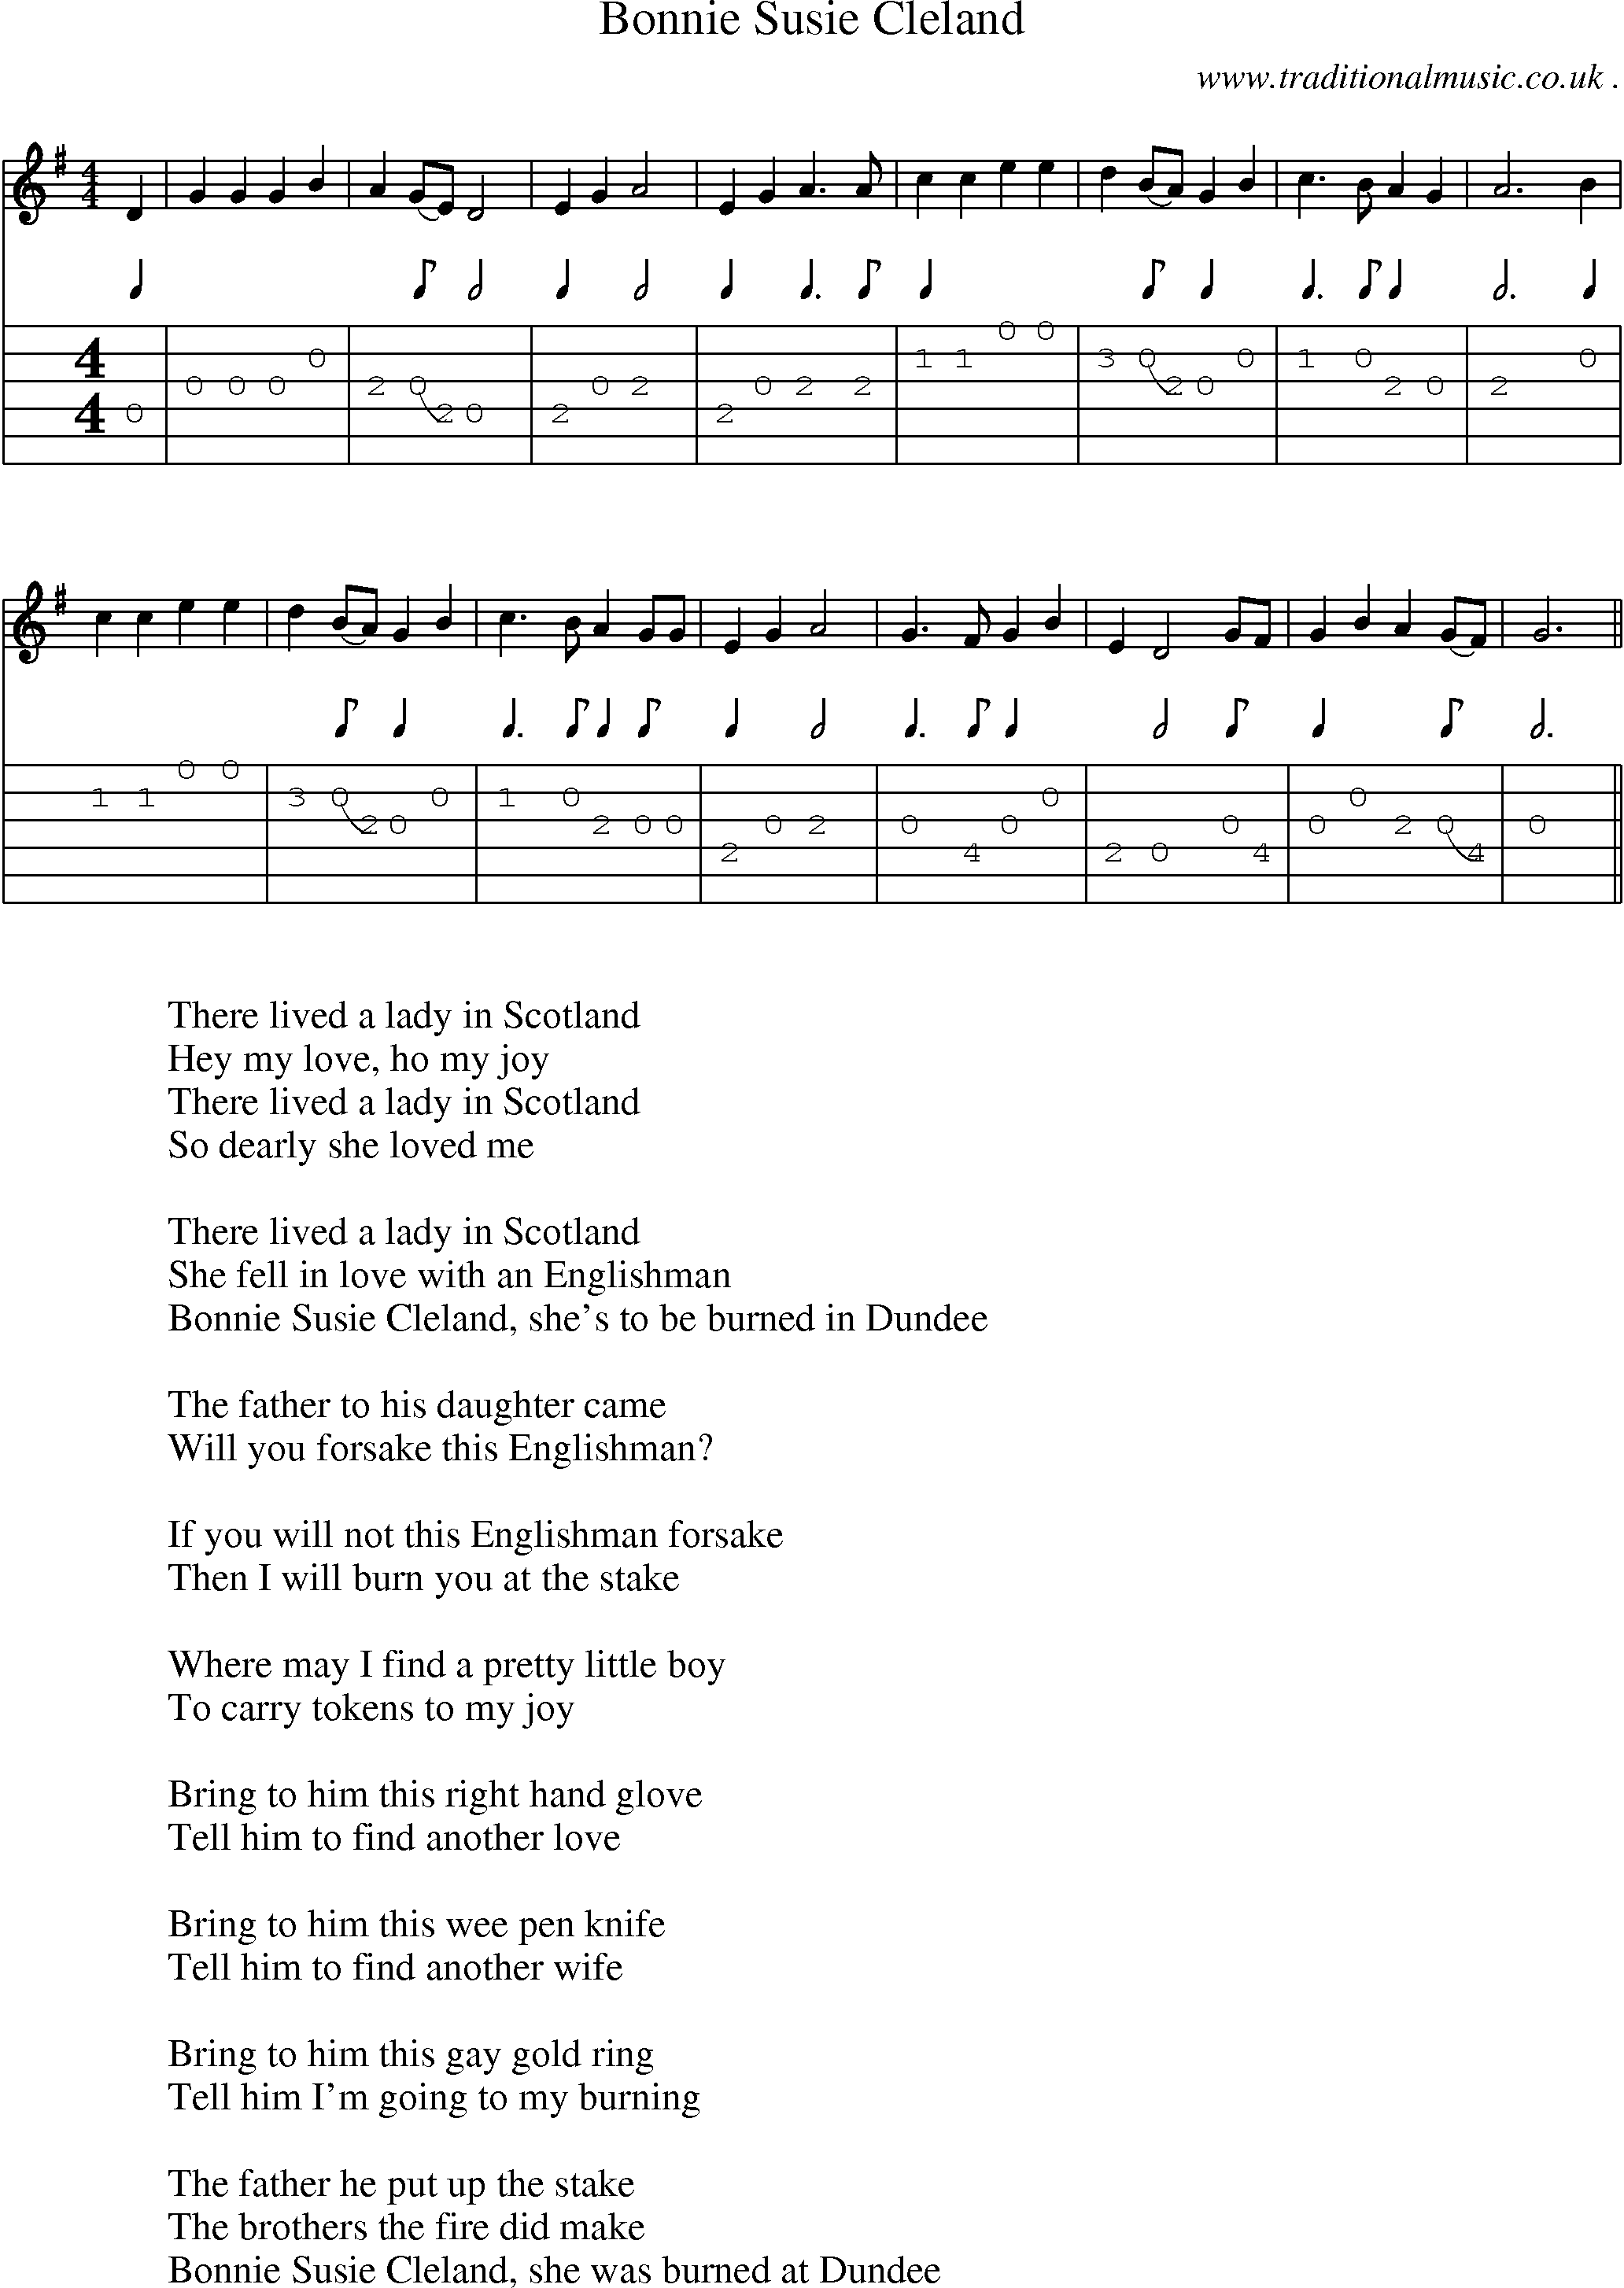 Sheet-Music and Guitar Tabs for Bonnie Susie Cleland